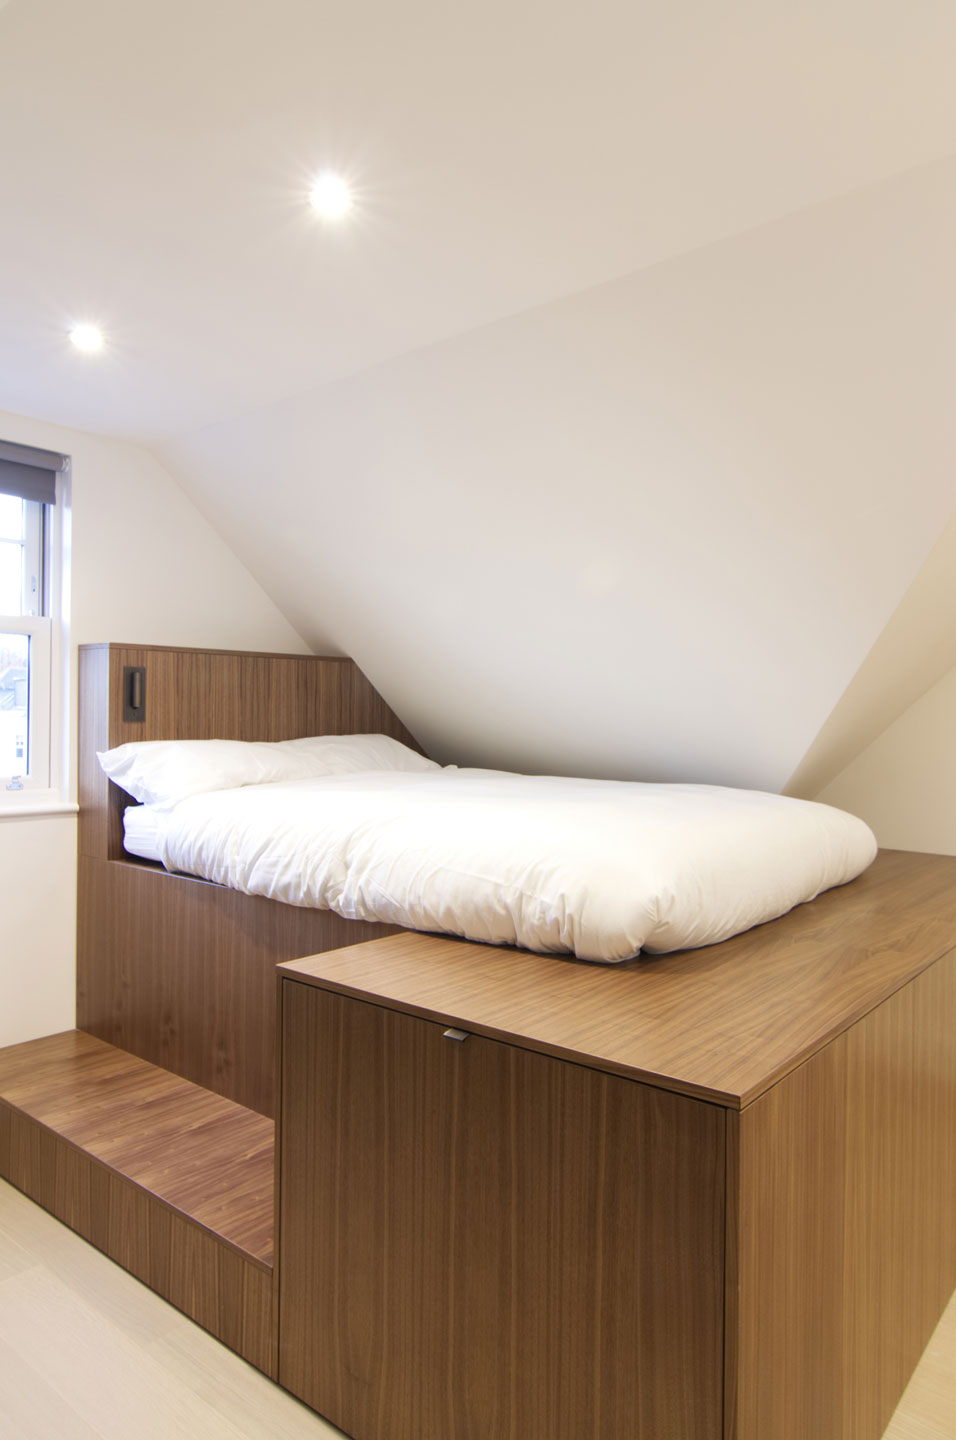 Wooden-units-inside-the-apartment-also-bring-ample-storage-along-with-them-45873